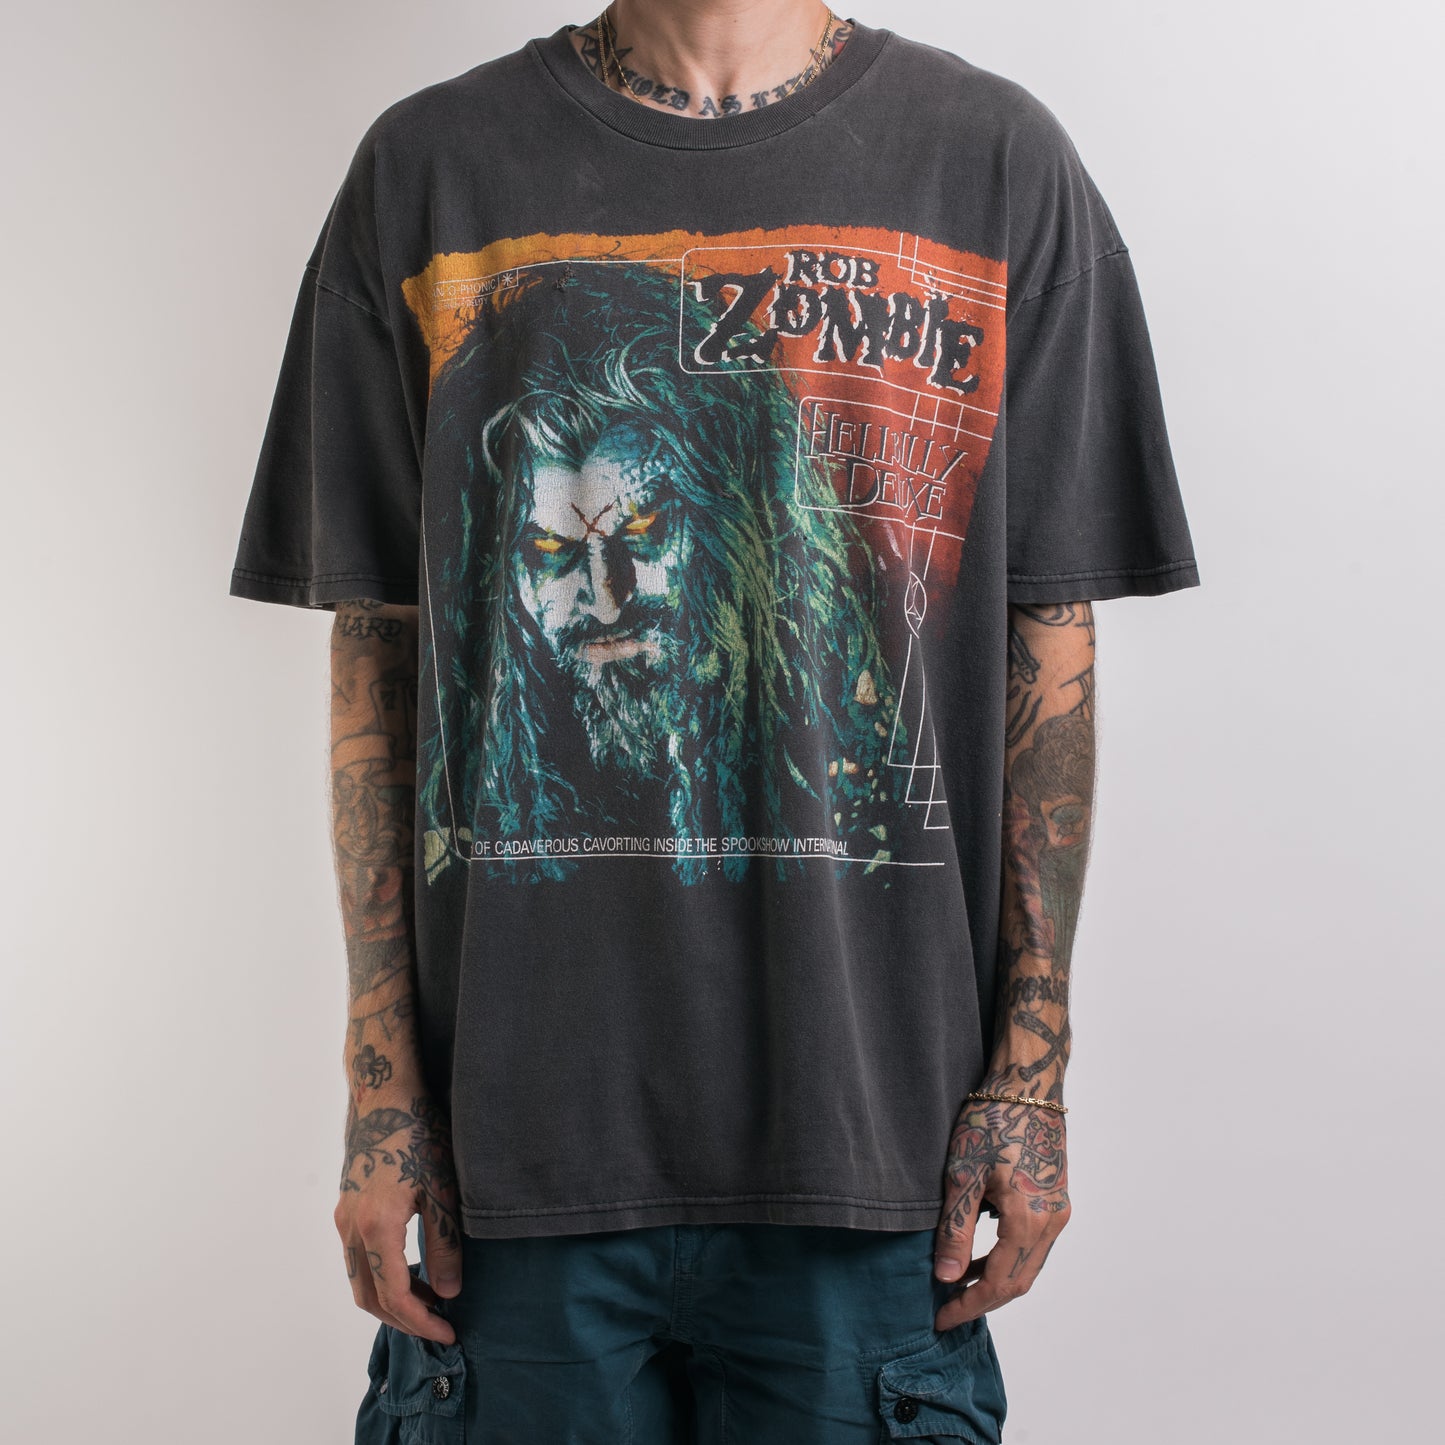 Vintage 1998 Rob Zombie Hillbilly Deluxe T-Shirt